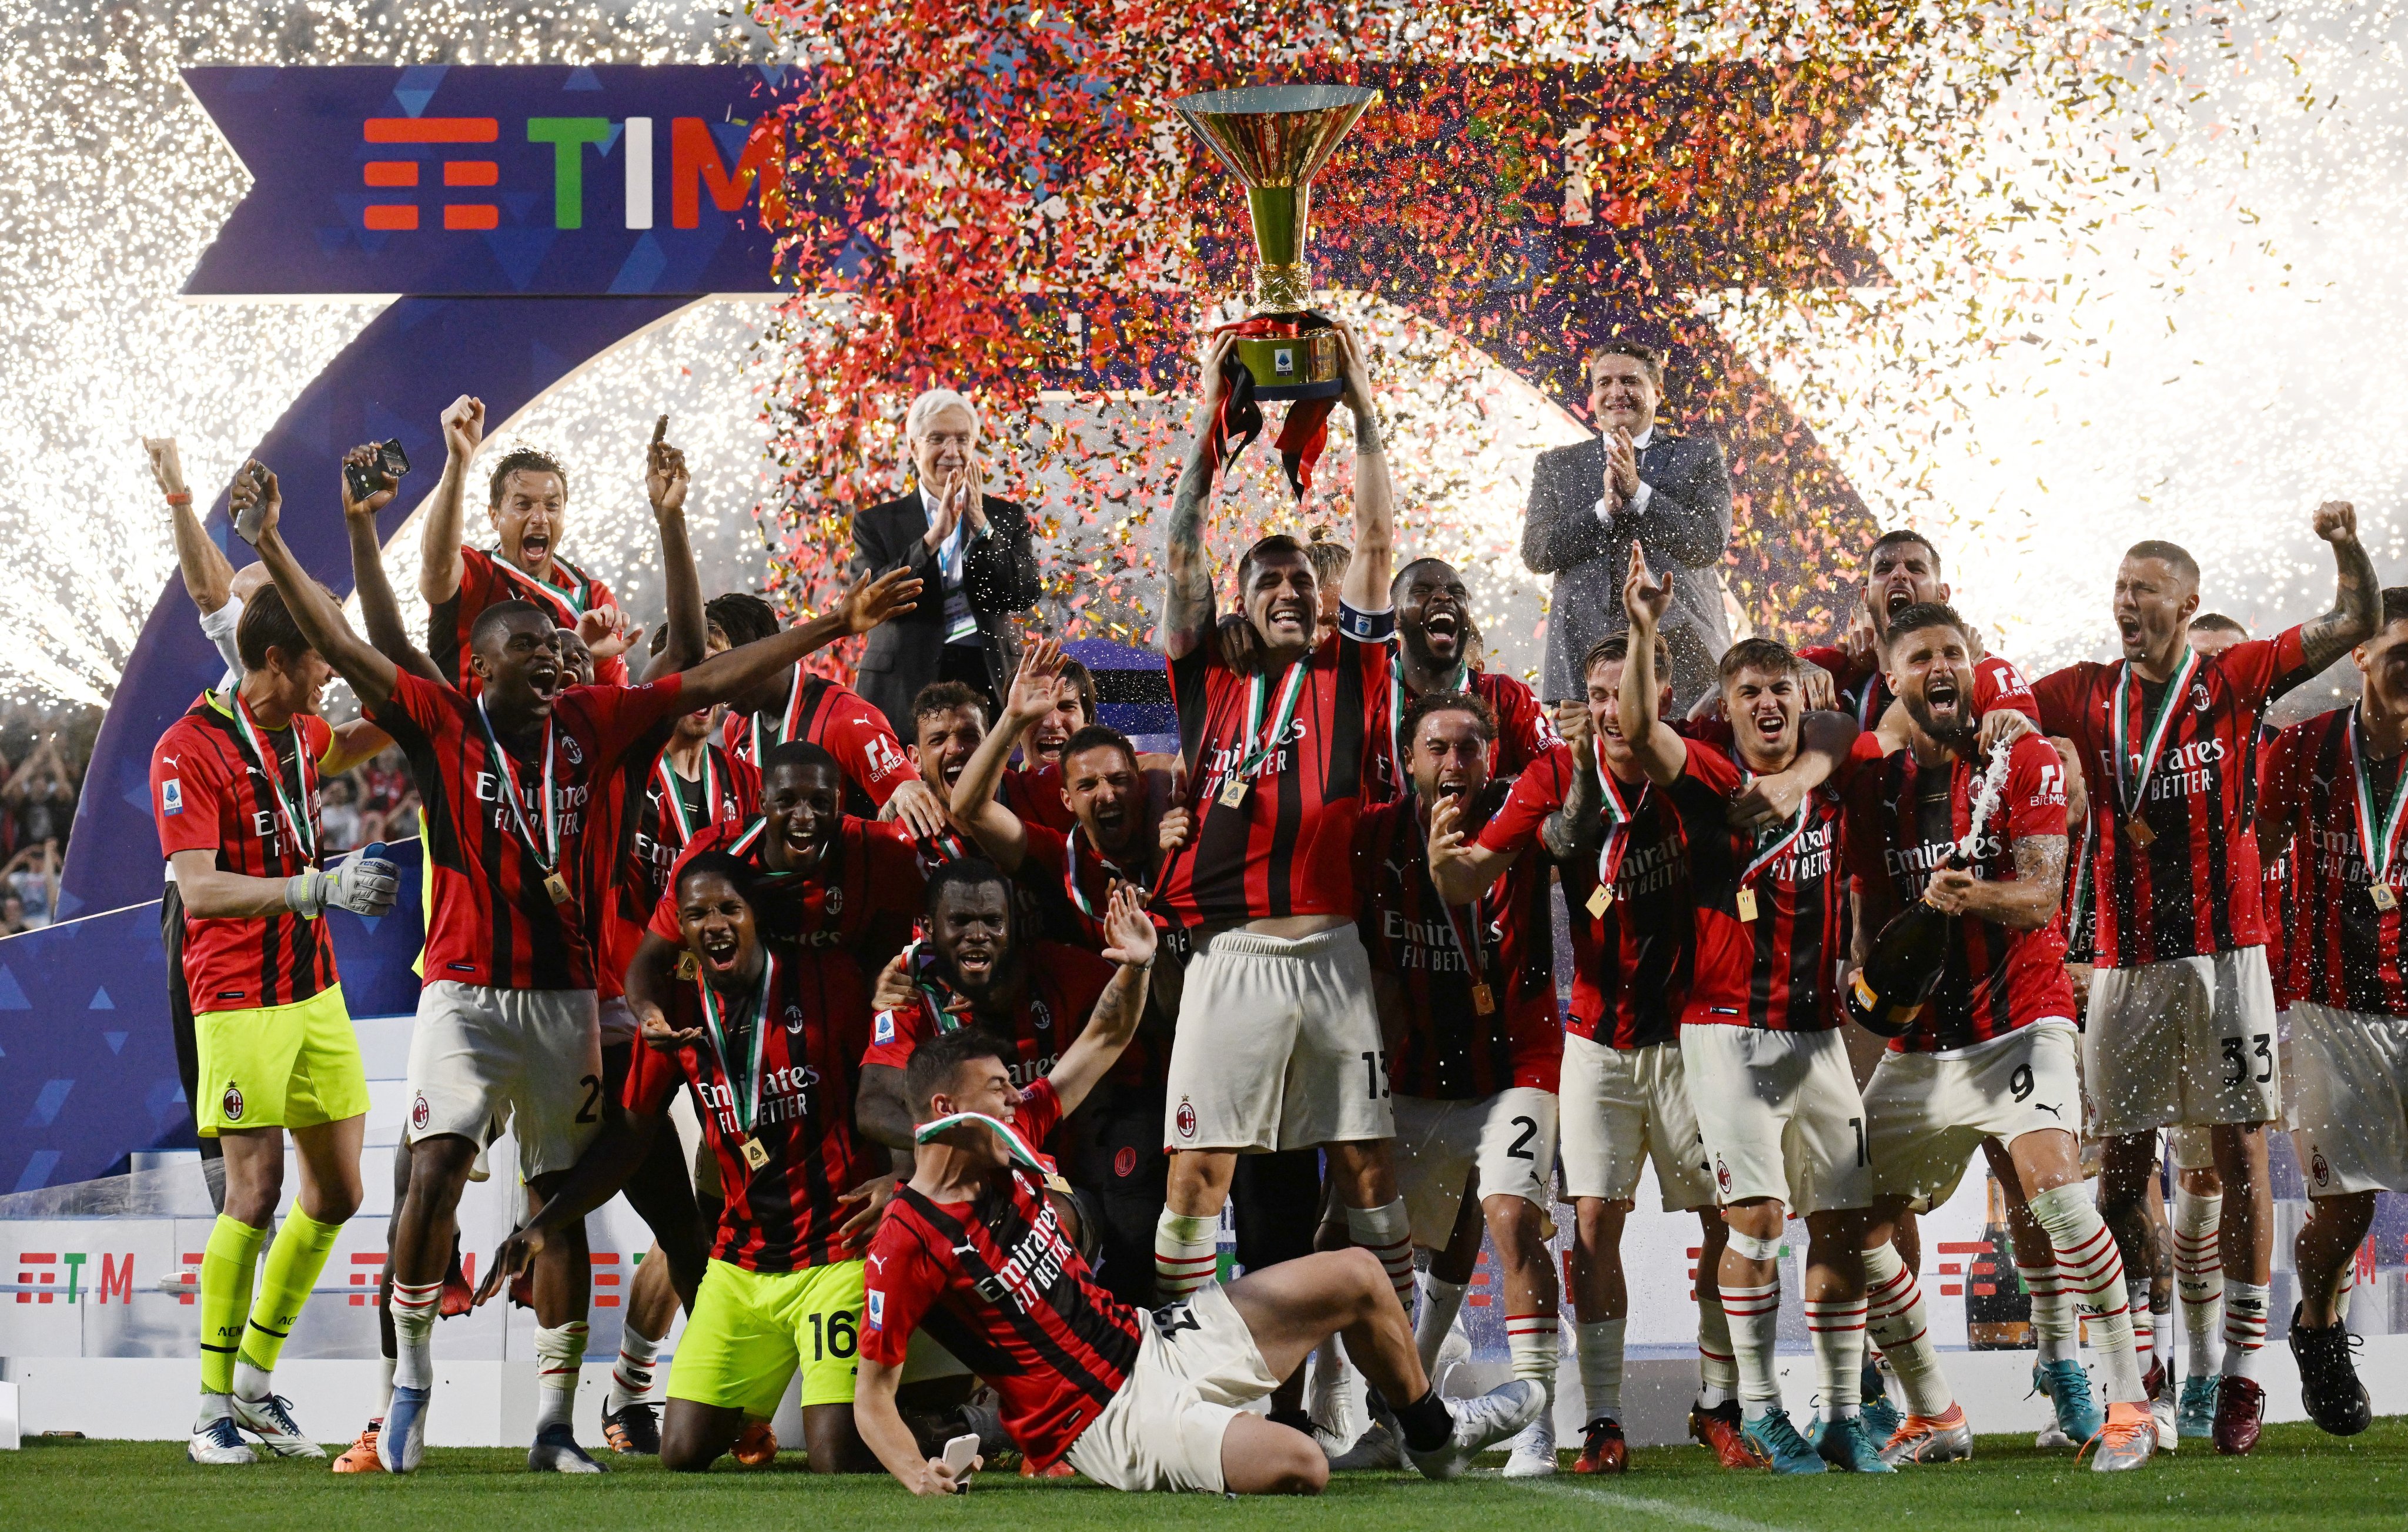 Serie A: AC Milan win the Serie A title, Rossoneri claim first SCUDETTO in 11 years to beat Sassuolo comfortably as Oliver Giroud grabs a brace, Watch HIGHLIGHTS